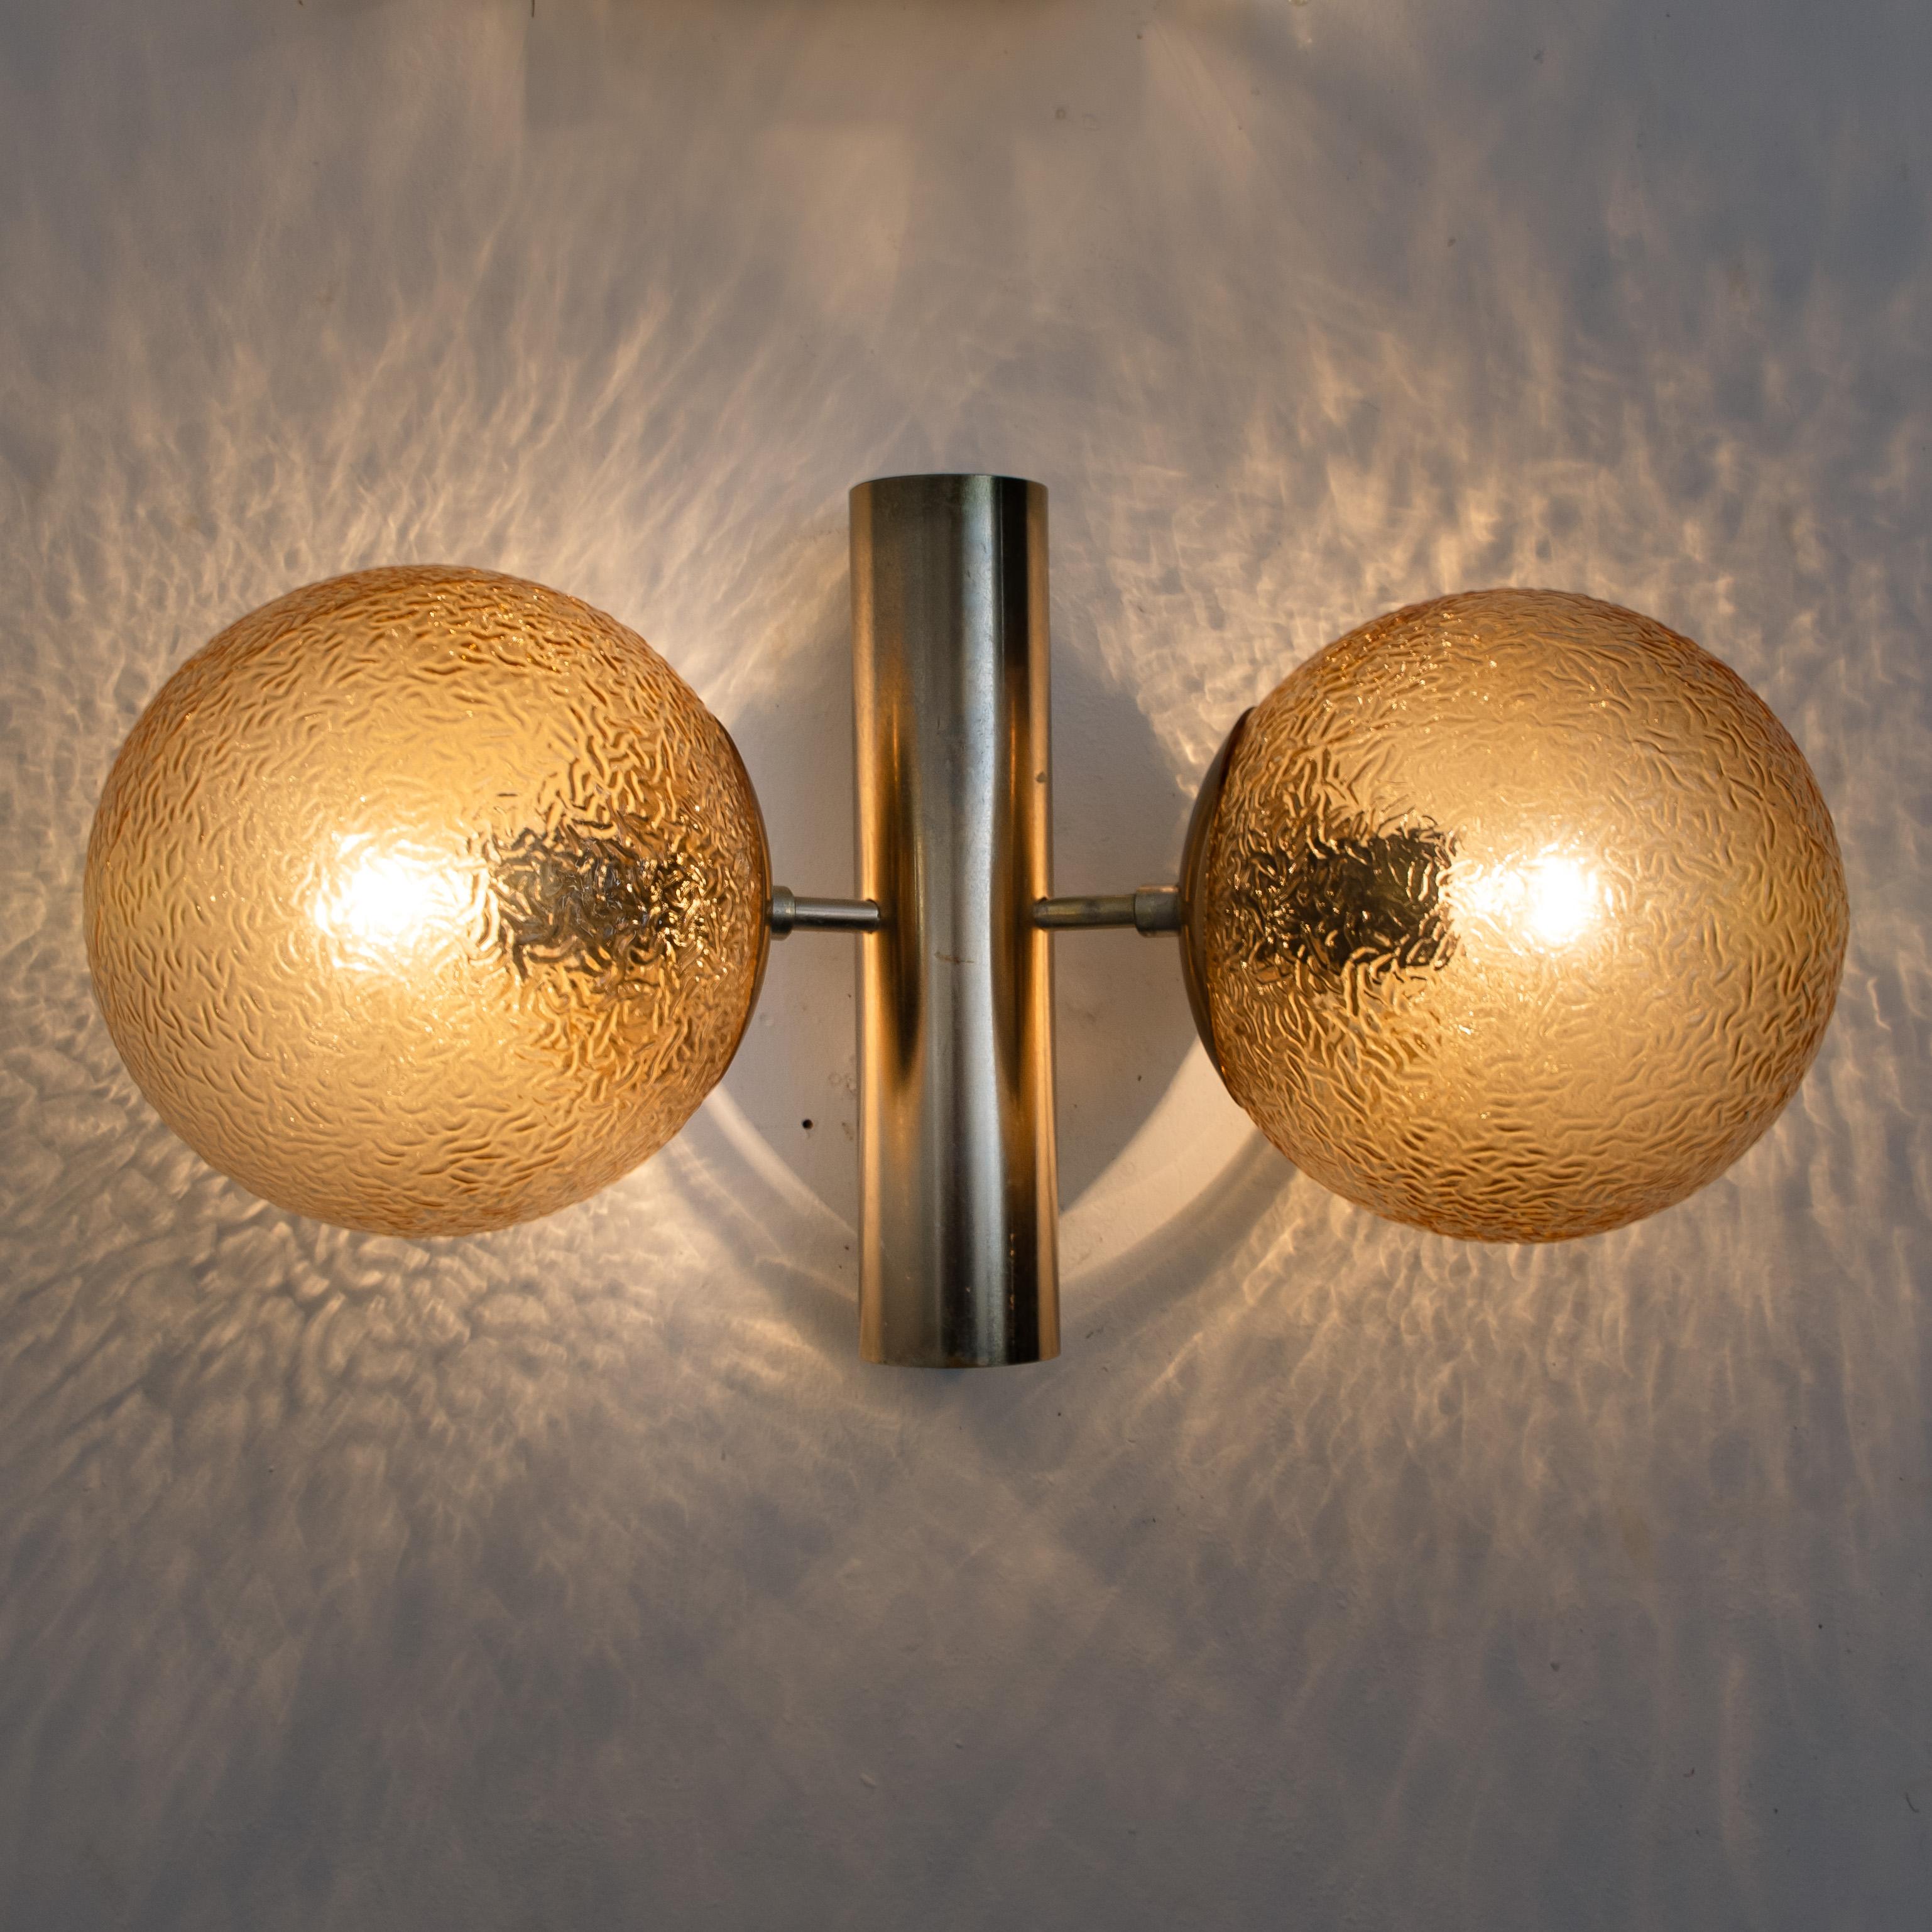 Four gorgeous wall lights with a molecular structure brass central body is surround by 2 attached globes. With amber colored glass. Illuminates beautifully. 

Measures: Height of the wall lights (10.2